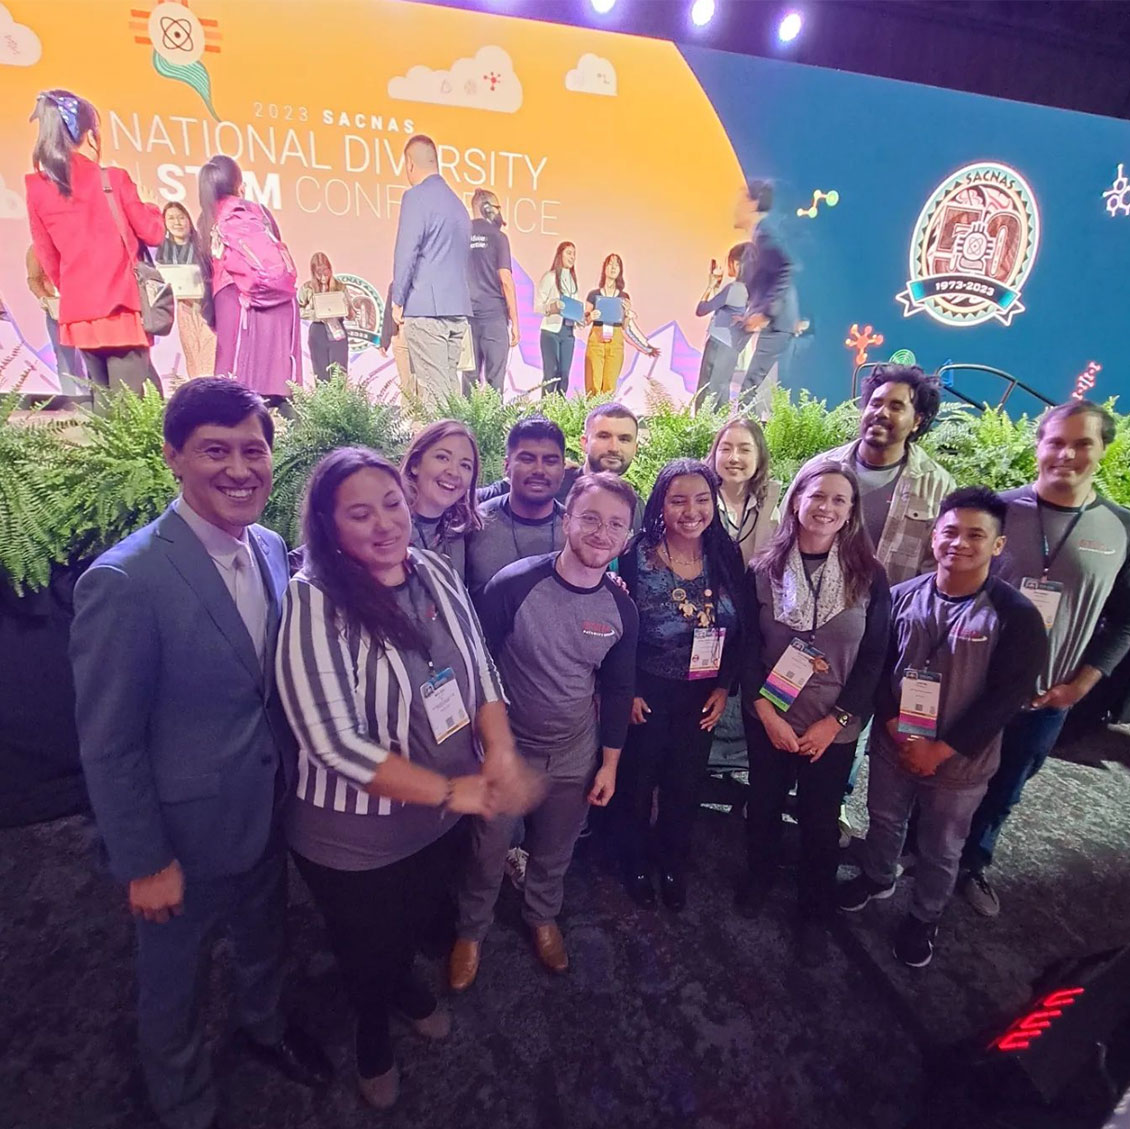 2023 N Di STEM SACNAS Conference. 12 people from the STEM Pathways Program both staff and scholars stand in front of main stage with their SACNAS conference badges hanging from their neck.The background is of diverse people coming together in front of the SACNAS logo 50th anniversary 1973- 2023.